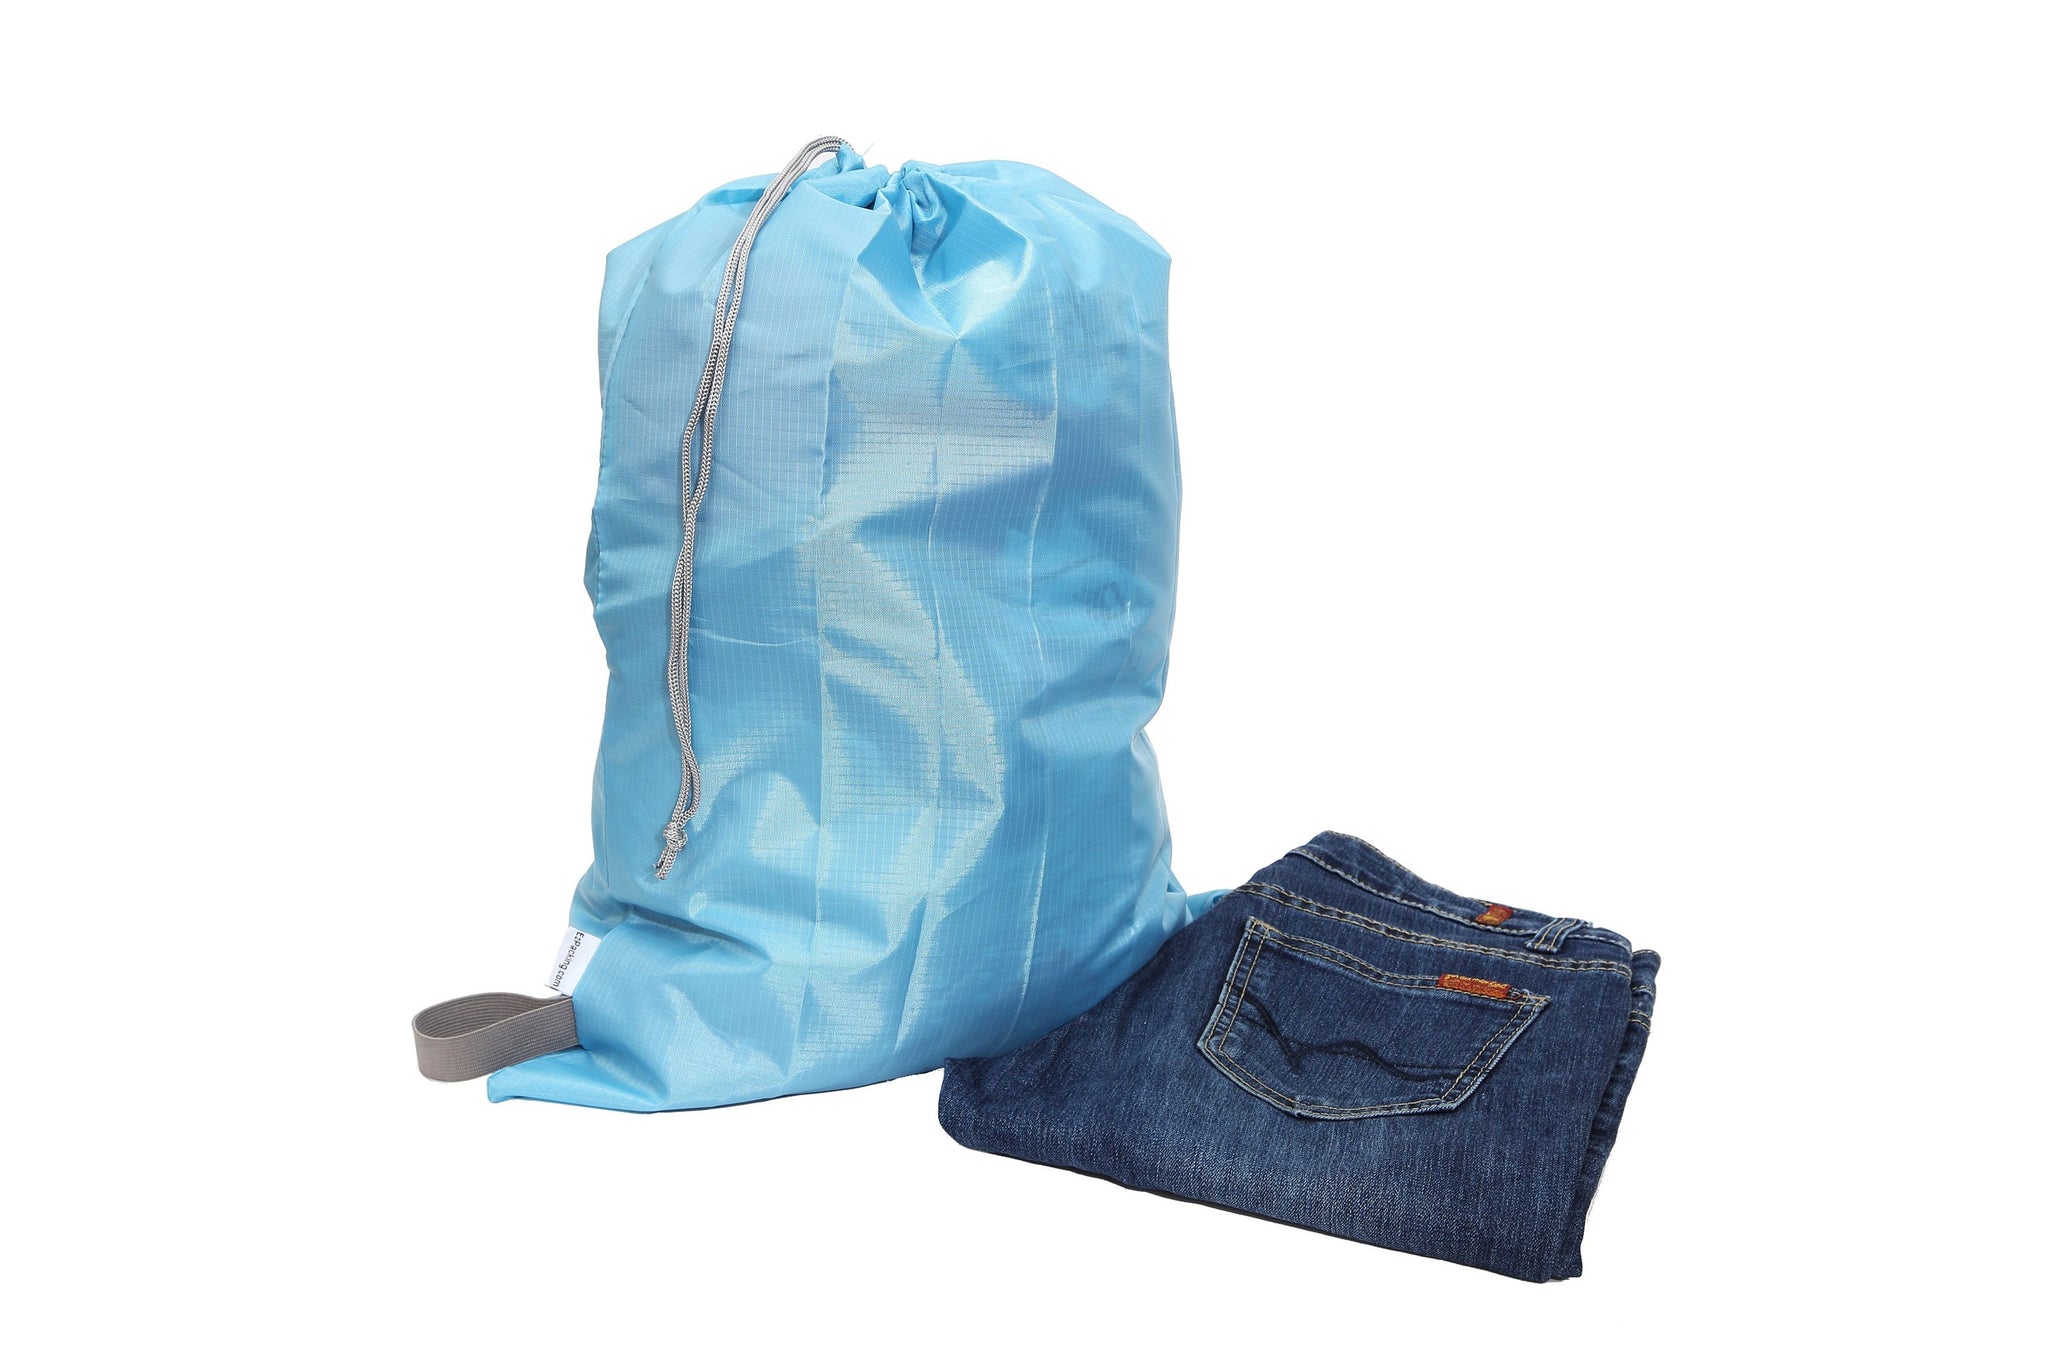 Travel Laundry Bag for Dirty Clothes - Small, Packable and